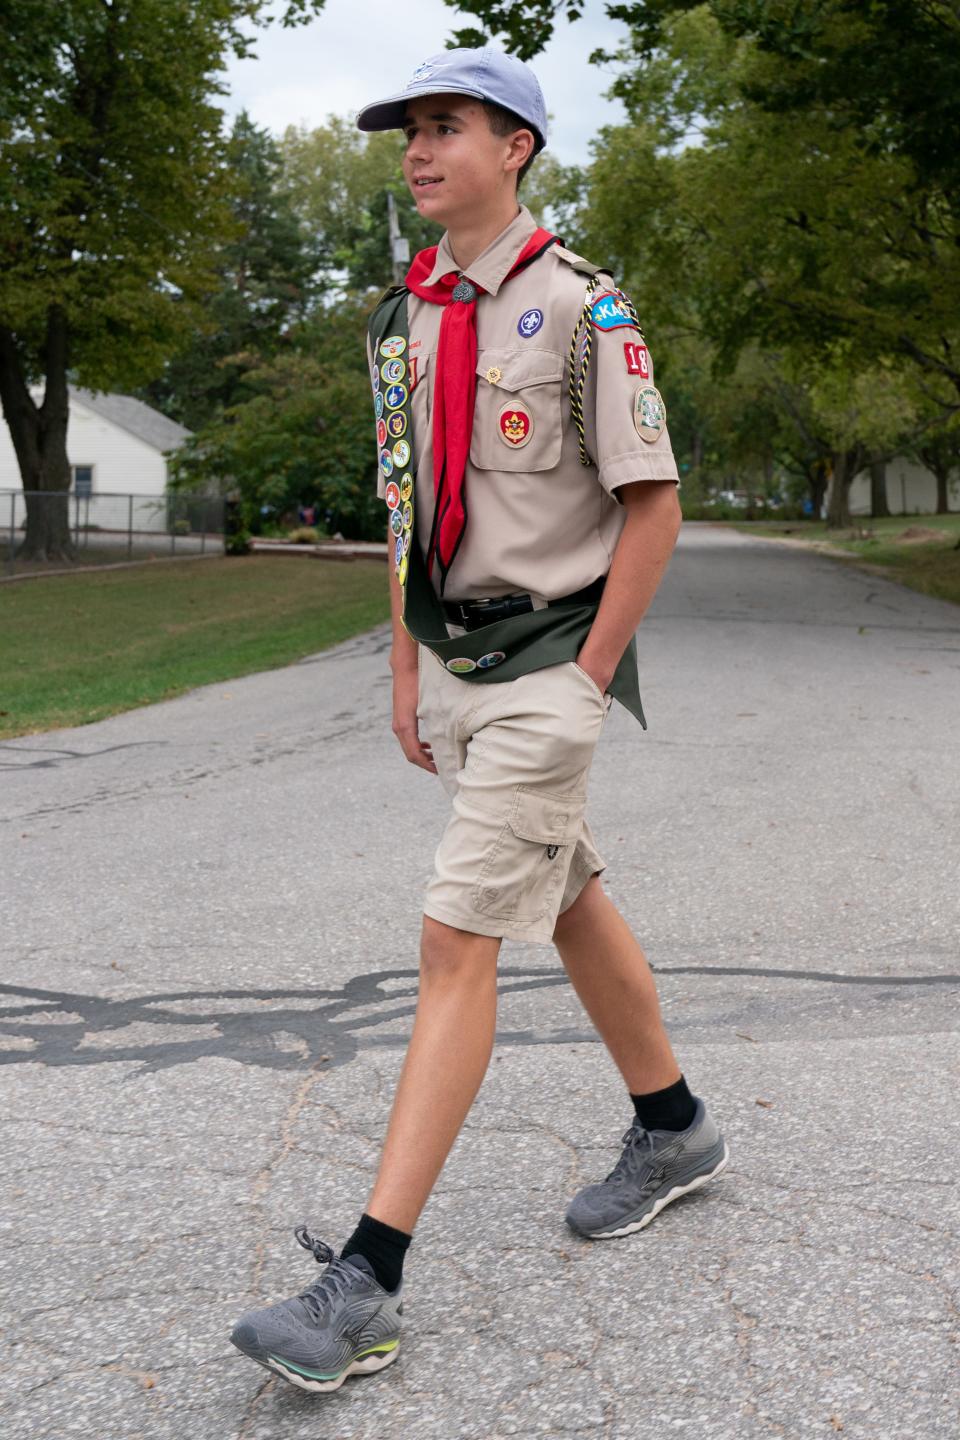 For Vincent Carter's Eagle Scout project, he created a 3-mile walking tour of historical buildings and sites in Tecumseh, which was the original Shawnee County seat.